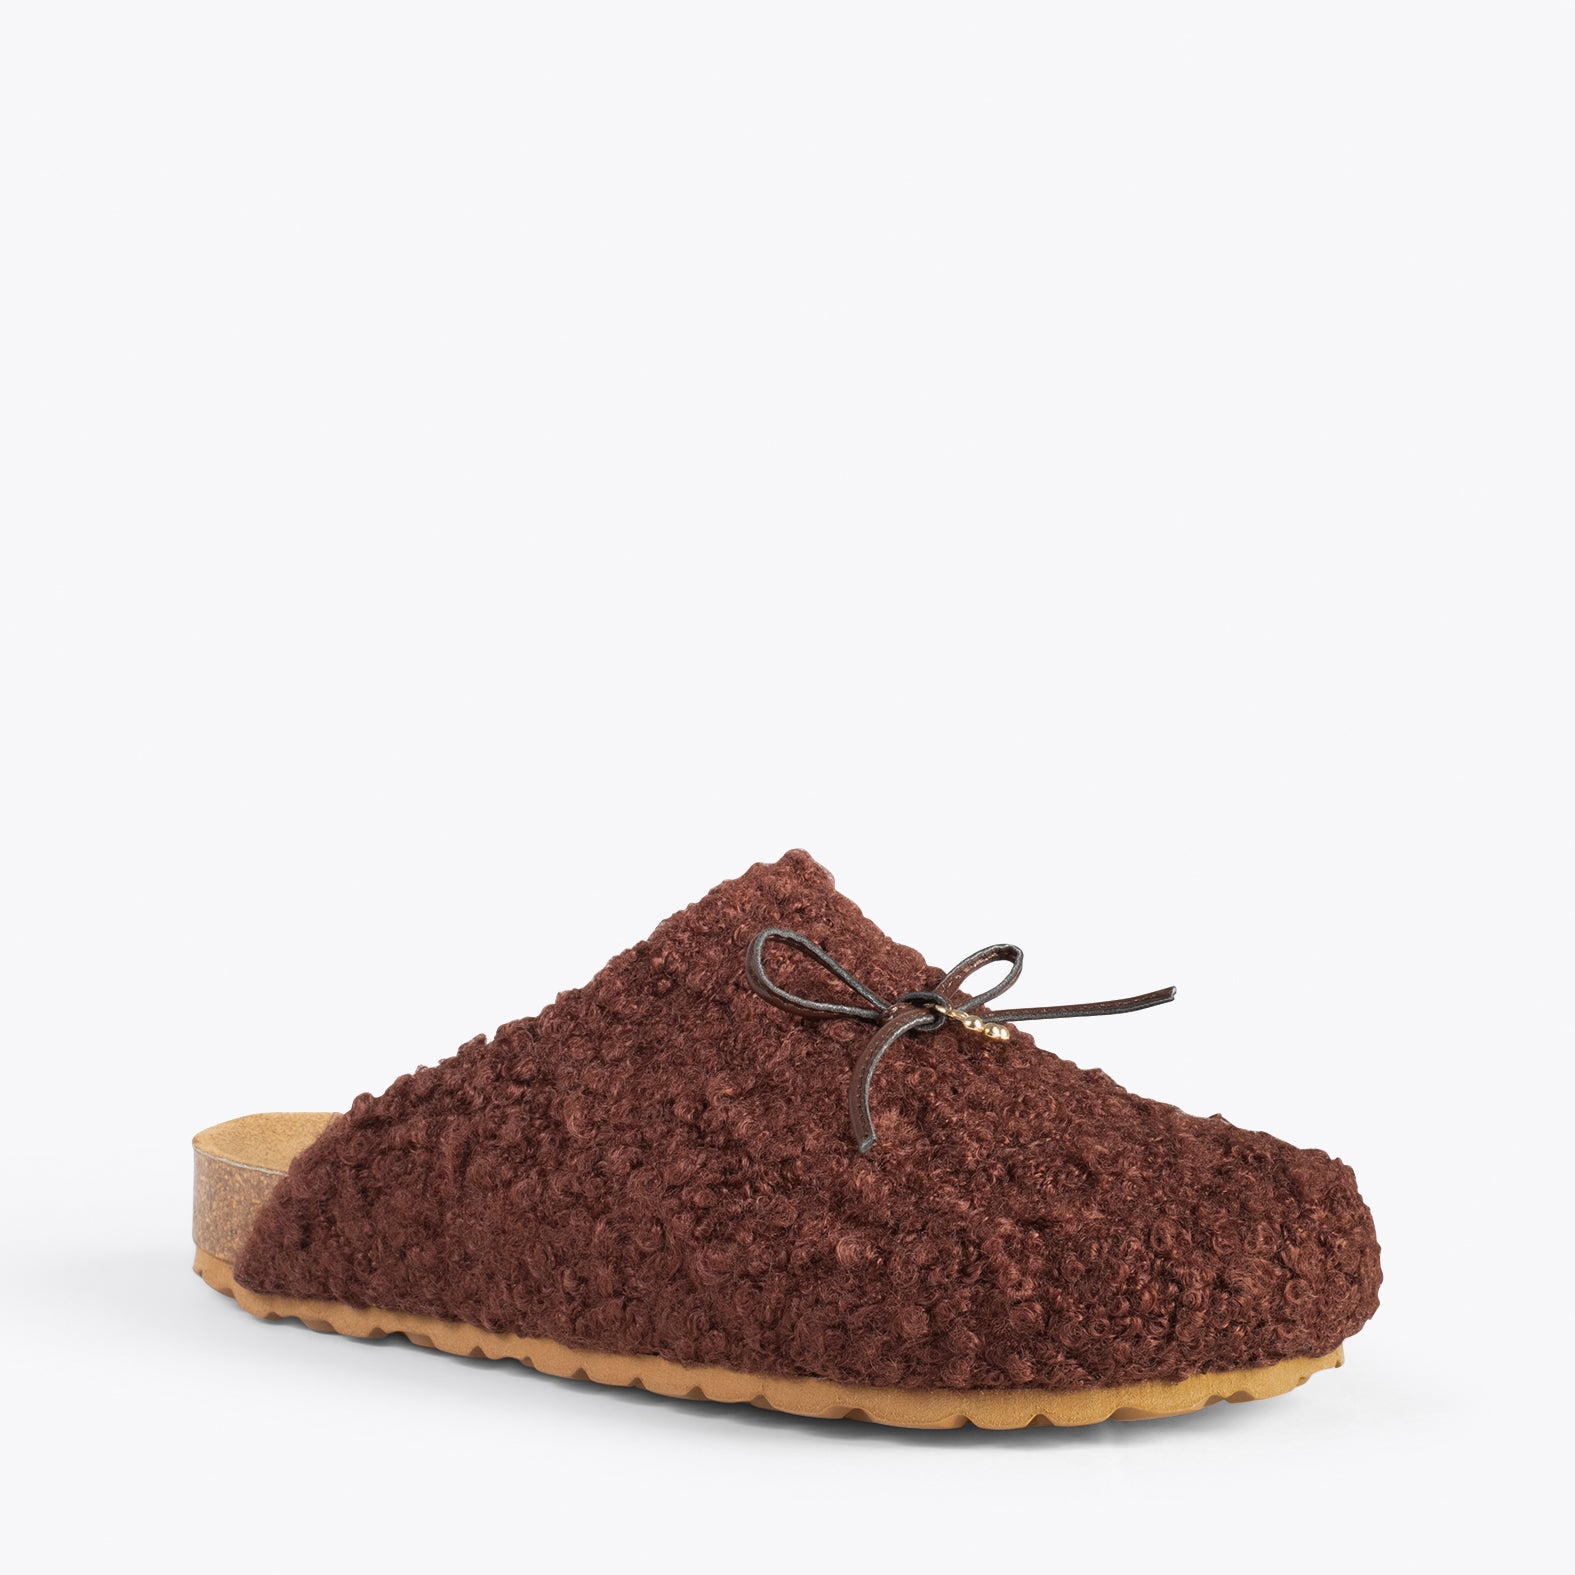 SWEET DREAMS – BROWN felt home slipper with ribbon